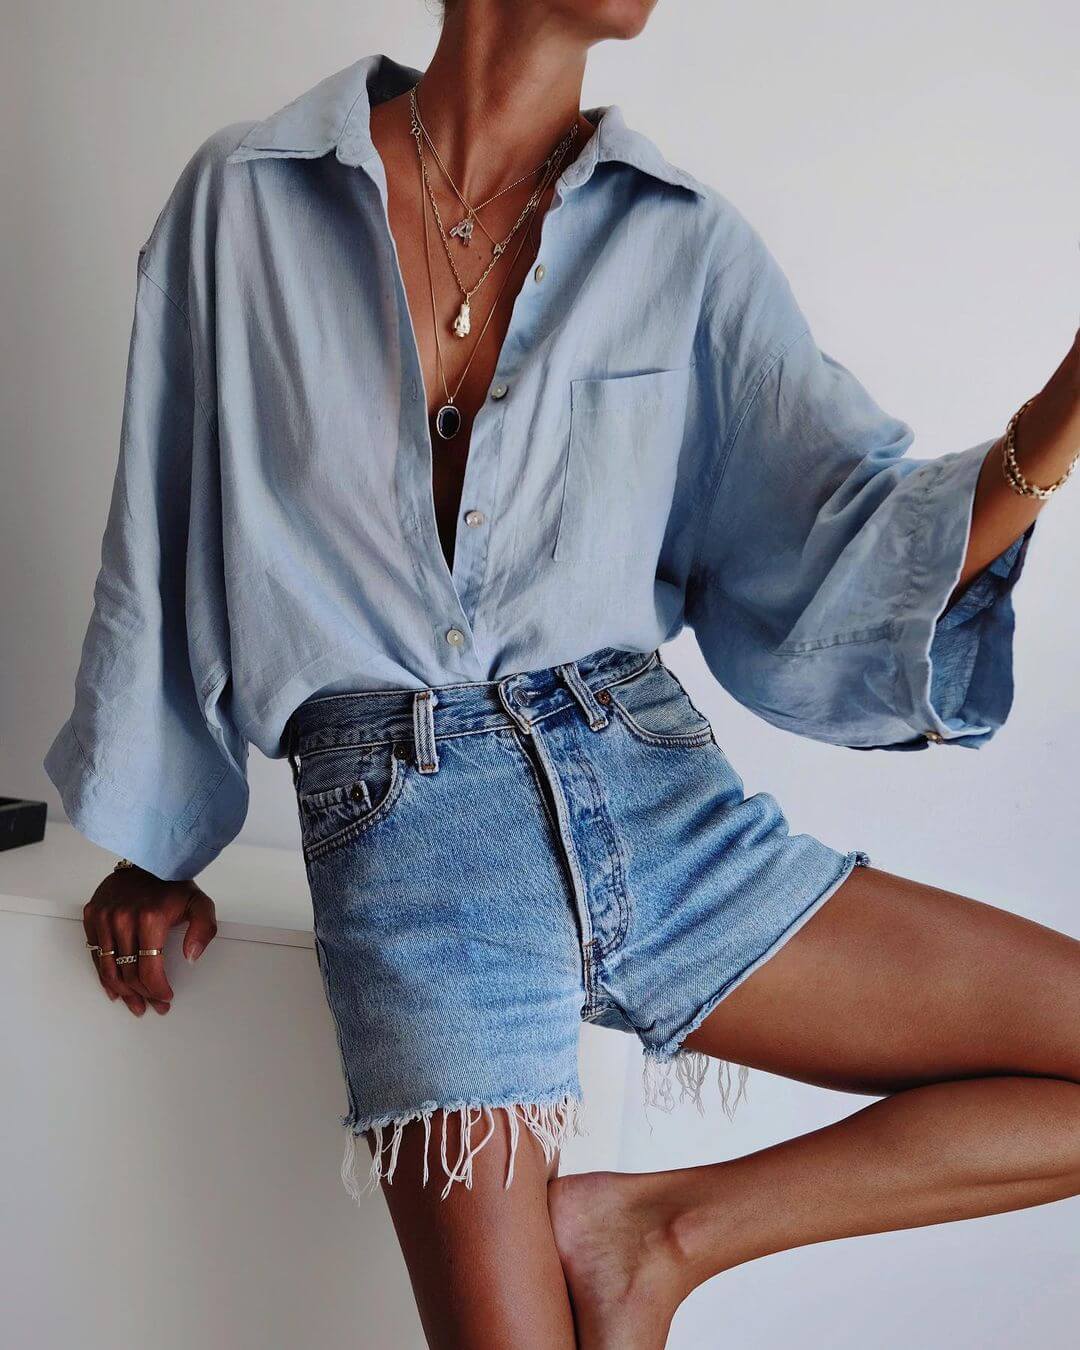 10 Effortless Outfits For Labor Day Weekend To Buy ASAP